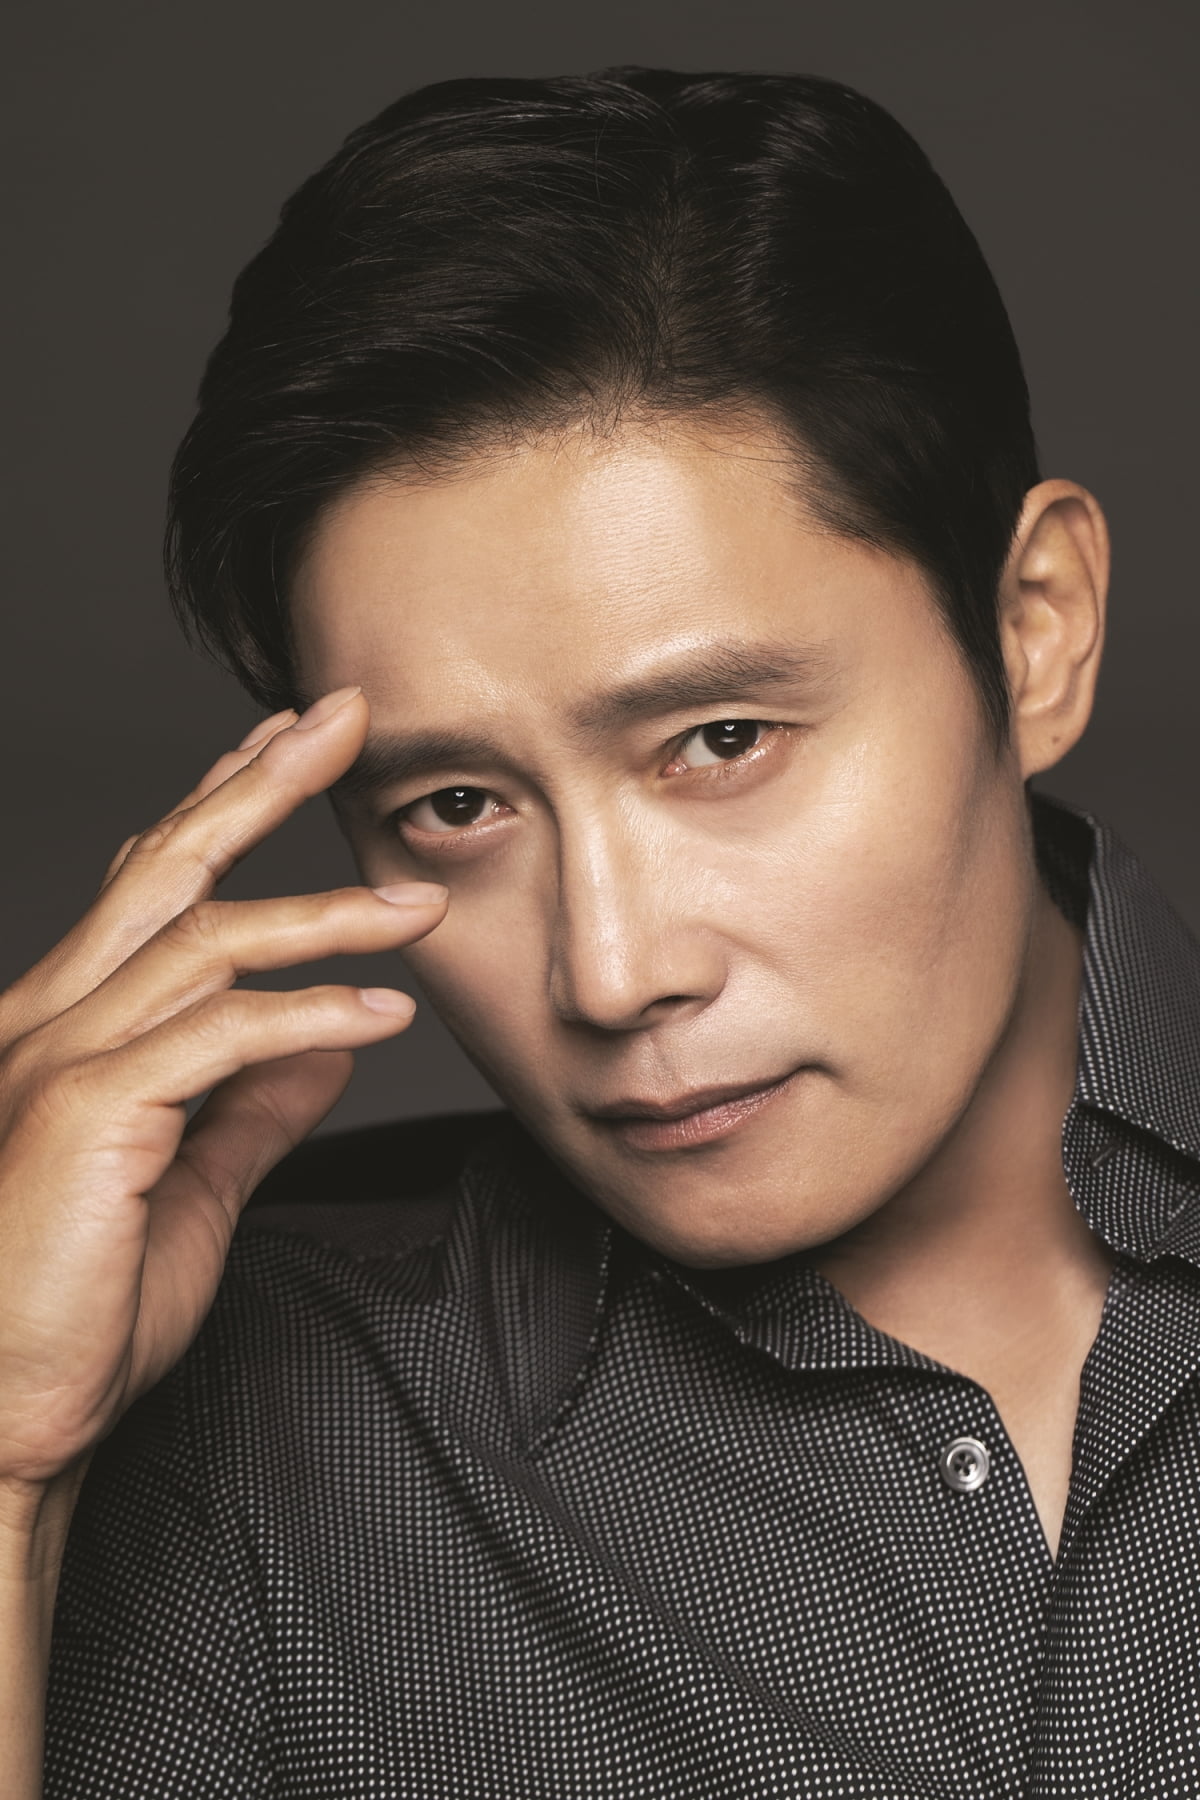 "It's fortunate that I'm not a genius" Lee Byung-hun, a quest for universality and innocence